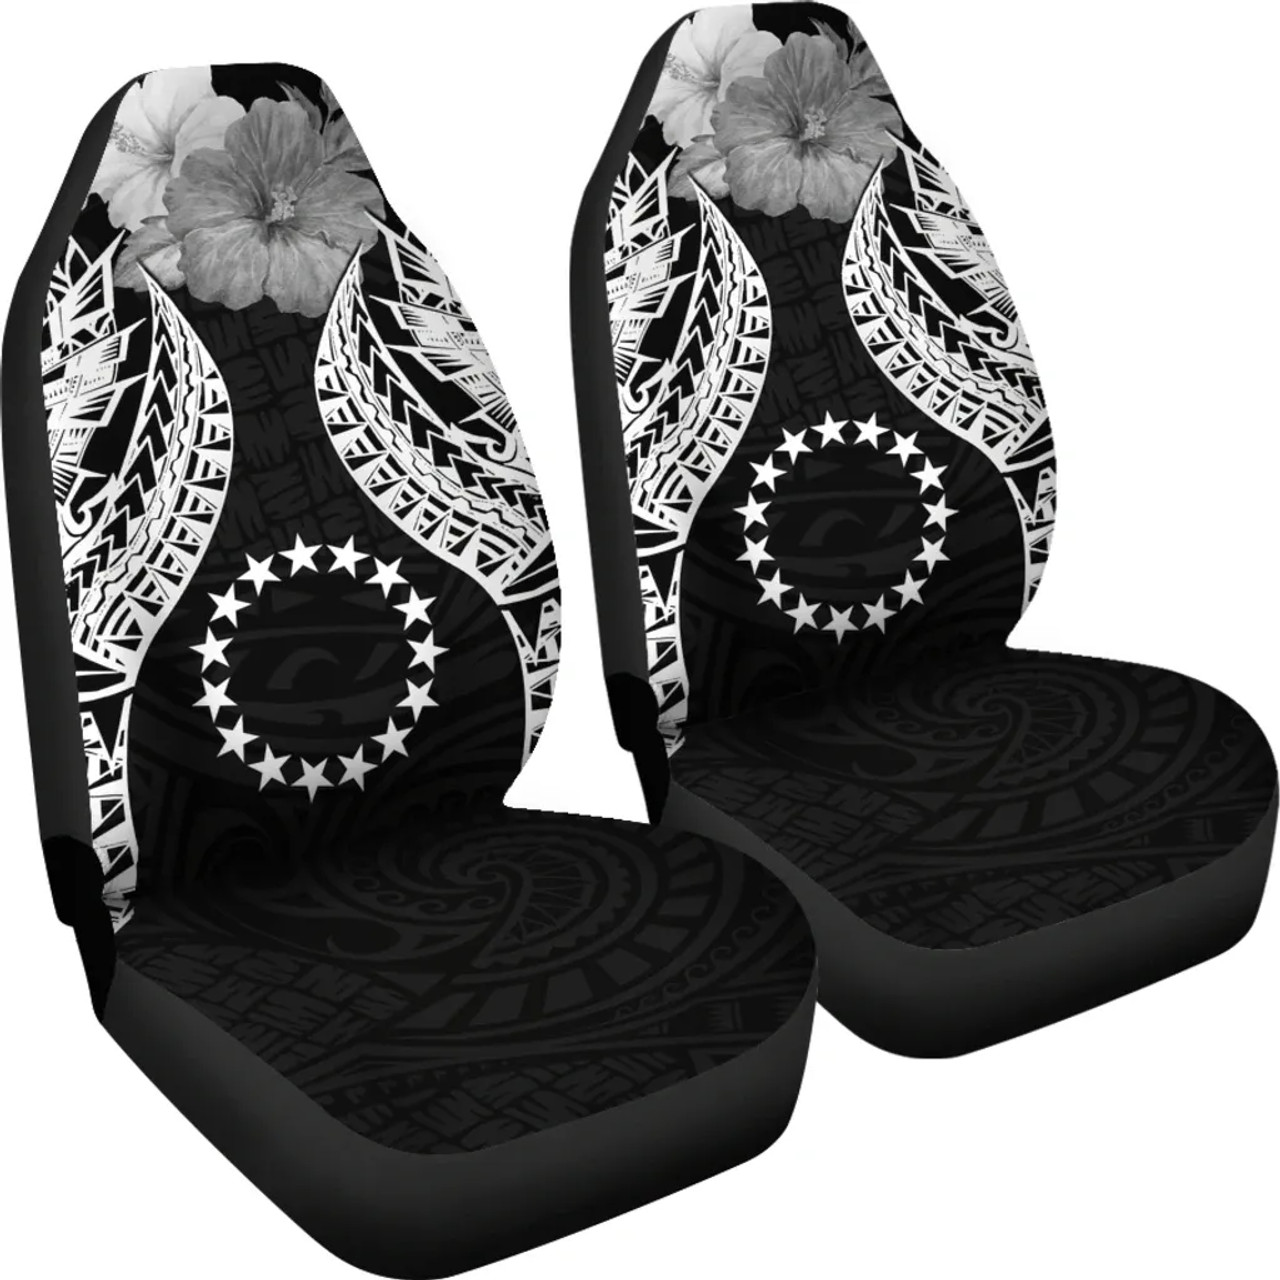 Cook islands Polynesian Car Seat Covers Pride Seal And Hibiscus Black